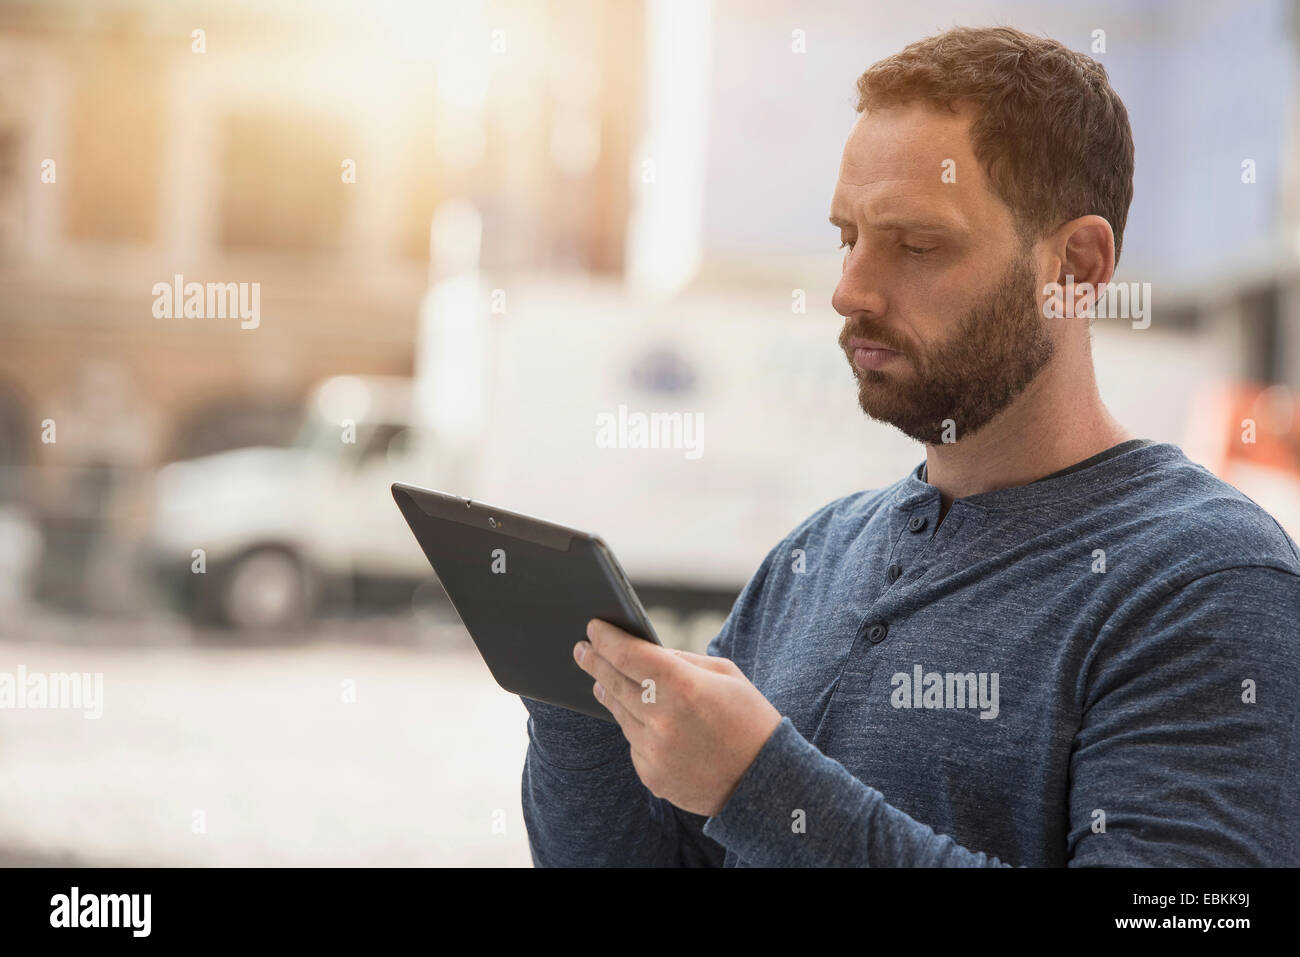 Delivery man using digital tablet Stock Photo